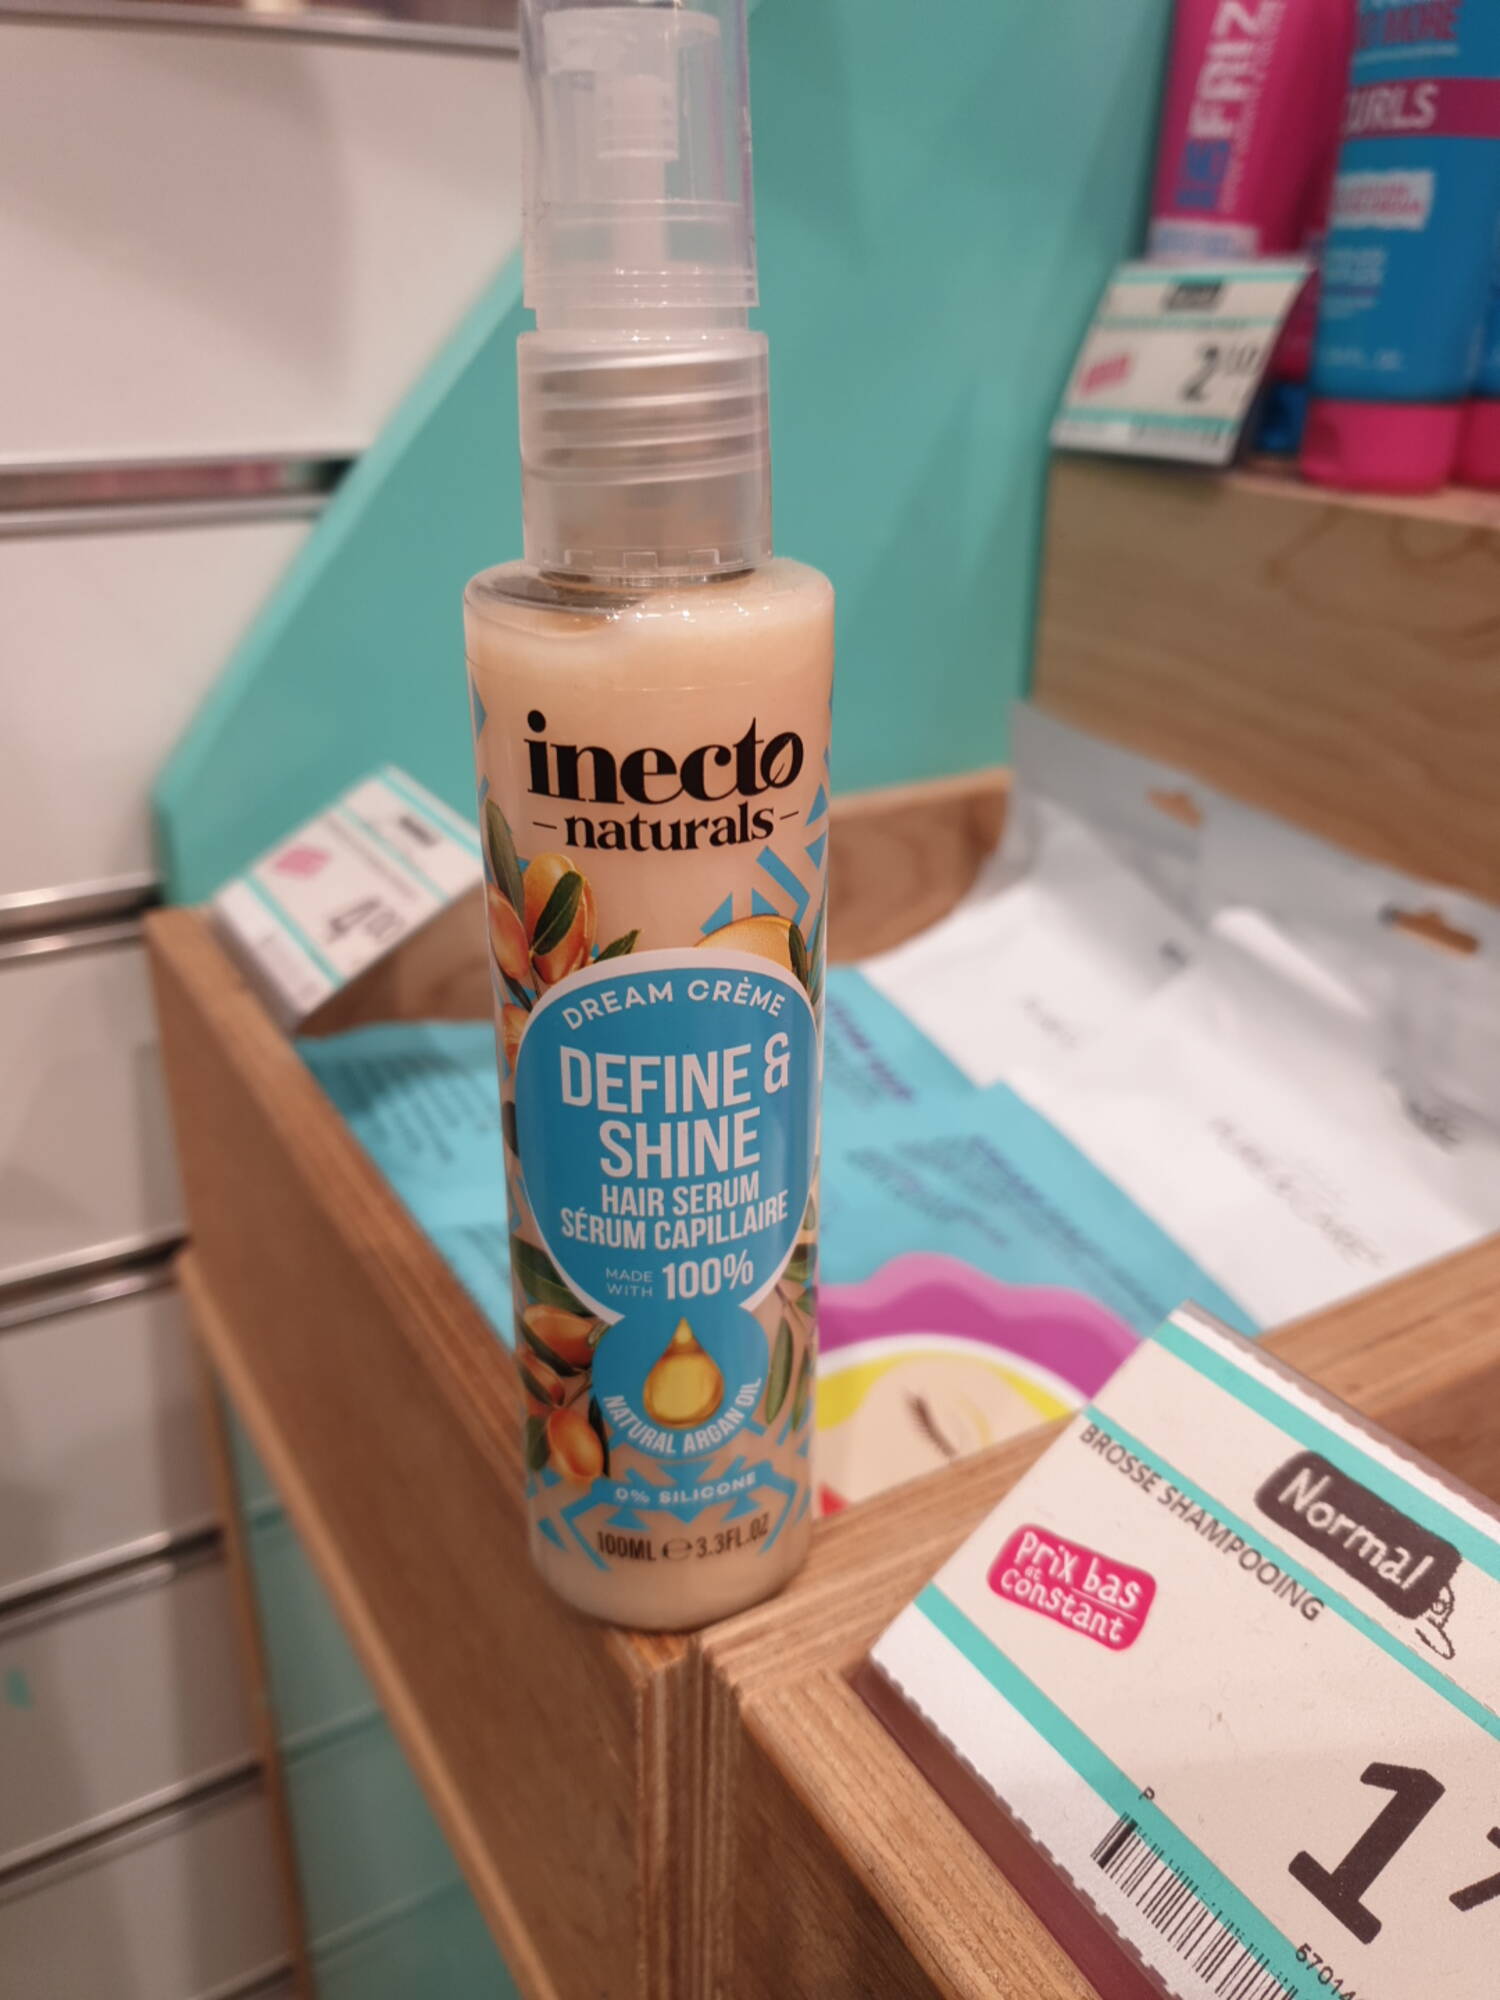 INECTO NATURALS - Define and shine -Sérum capillaire